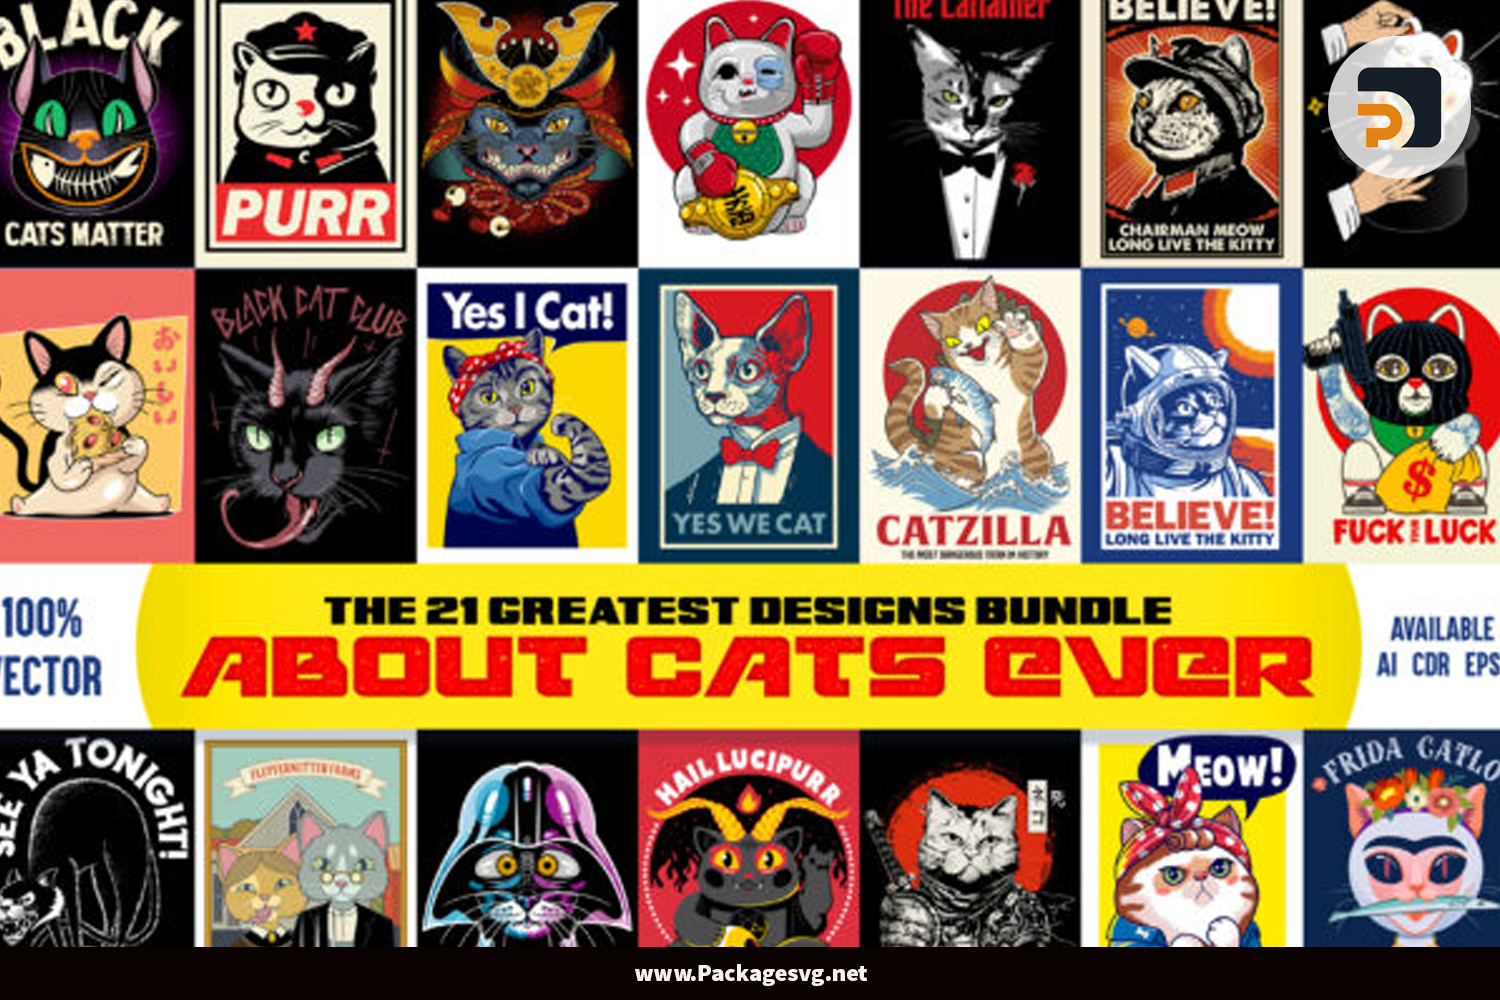 The 21 greatest designs about cats ever